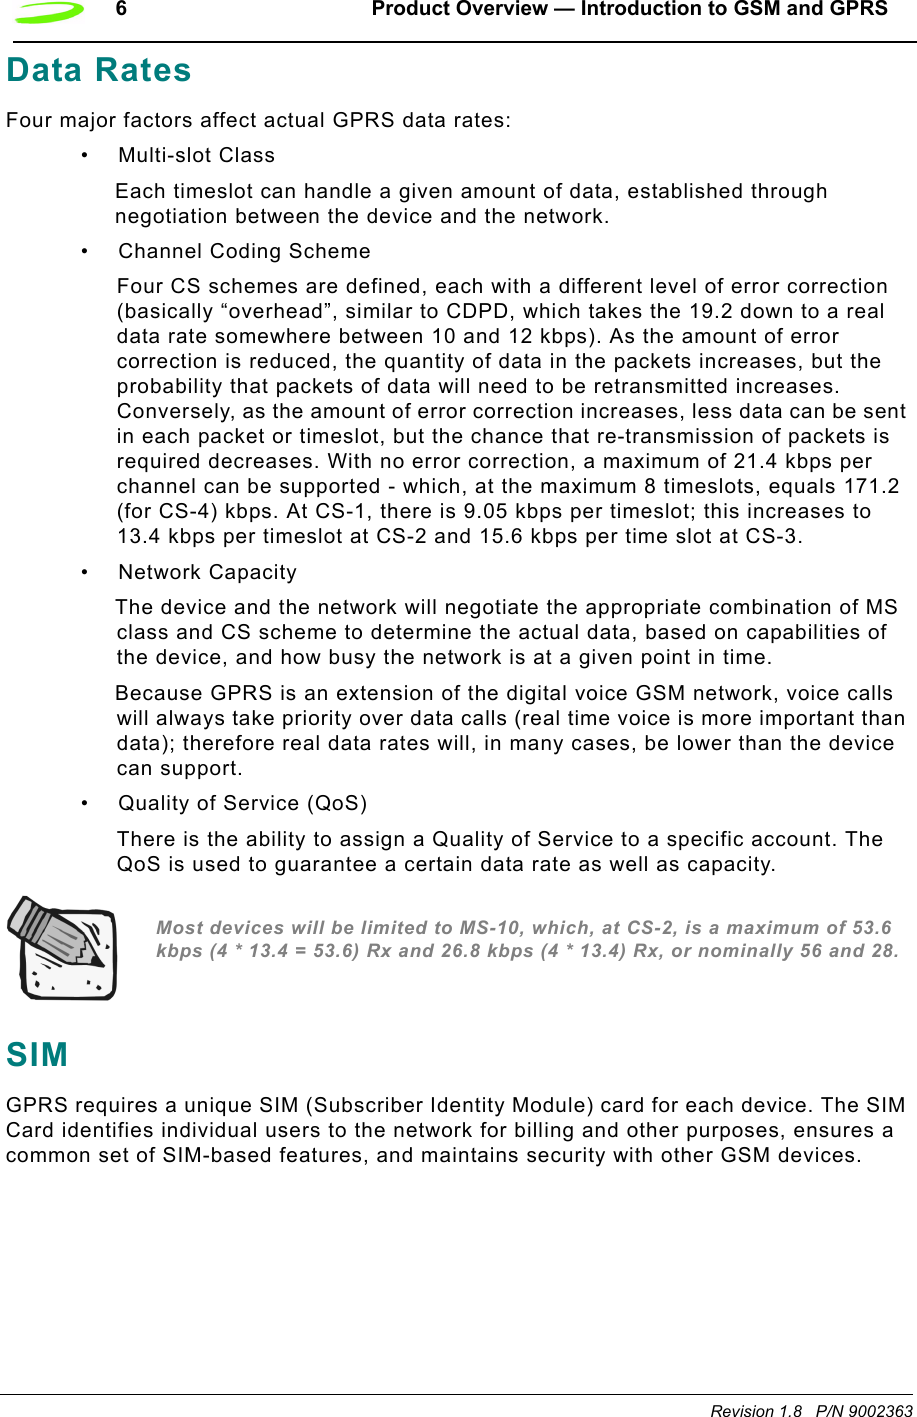 6 Product Overview — Introduction to GSM and GPRSRevision 1.8   P/N 9002363Data RatesFour major factors affect actual GPRS data rates:•Multi-slot ClassEach timeslot can handle a given amount of data, established through negotiation between the device and the network.• Channel Coding SchemeFour CS schemes are defined, each with a different level of error correction (basically “overhead”, similar to CDPD, which takes the 19.2 down to a real data rate somewhere between 10 and 12 kbps). As the amount of error correction is reduced, the quantity of data in the packets increases, but the probability that packets of data will need to be retransmitted increases. Conversely, as the amount of error correction increases, less data can be sent in each packet or timeslot, but the chance that re-transmission of packets is required decreases. With no error correction, a maximum of 21.4 kbps per channel can be supported - which, at the maximum 8 timeslots, equals 171.2 (for CS-4) kbps. At CS-1, there is 9.05 kbps per timeslot; this increases to 13.4 kbps per timeslot at CS-2 and 15.6 kbps per time slot at CS-3.• Network CapacityThe device and the network will negotiate the appropriate combination of MS class and CS scheme to determine the actual data, based on capabilities of the device, and how busy the network is at a given point in time.Because GPRS is an extension of the digital voice GSM network, voice calls will always take priority over data calls (real time voice is more important than data); therefore real data rates will, in many cases, be lower than the device can support.• Quality of Service (QoS)There is the ability to assign a Quality of Service to a specific account. The QoS is used to guarantee a certain data rate as well as capacity.Most devices will be limited to MS-10, which, at CS-2, is a maximum of 53.6 kbps (4 * 13.4 = 53.6) Rx and 26.8 kbps (4 * 13.4) Rx, or nominally 56 and 28.SIMGPRS requires a unique SIM (Subscriber Identity Module) card for each device. The SIM Card identifies individual users to the network for billing and other purposes, ensures a common set of SIM-based features, and maintains security with other GSM devices. 